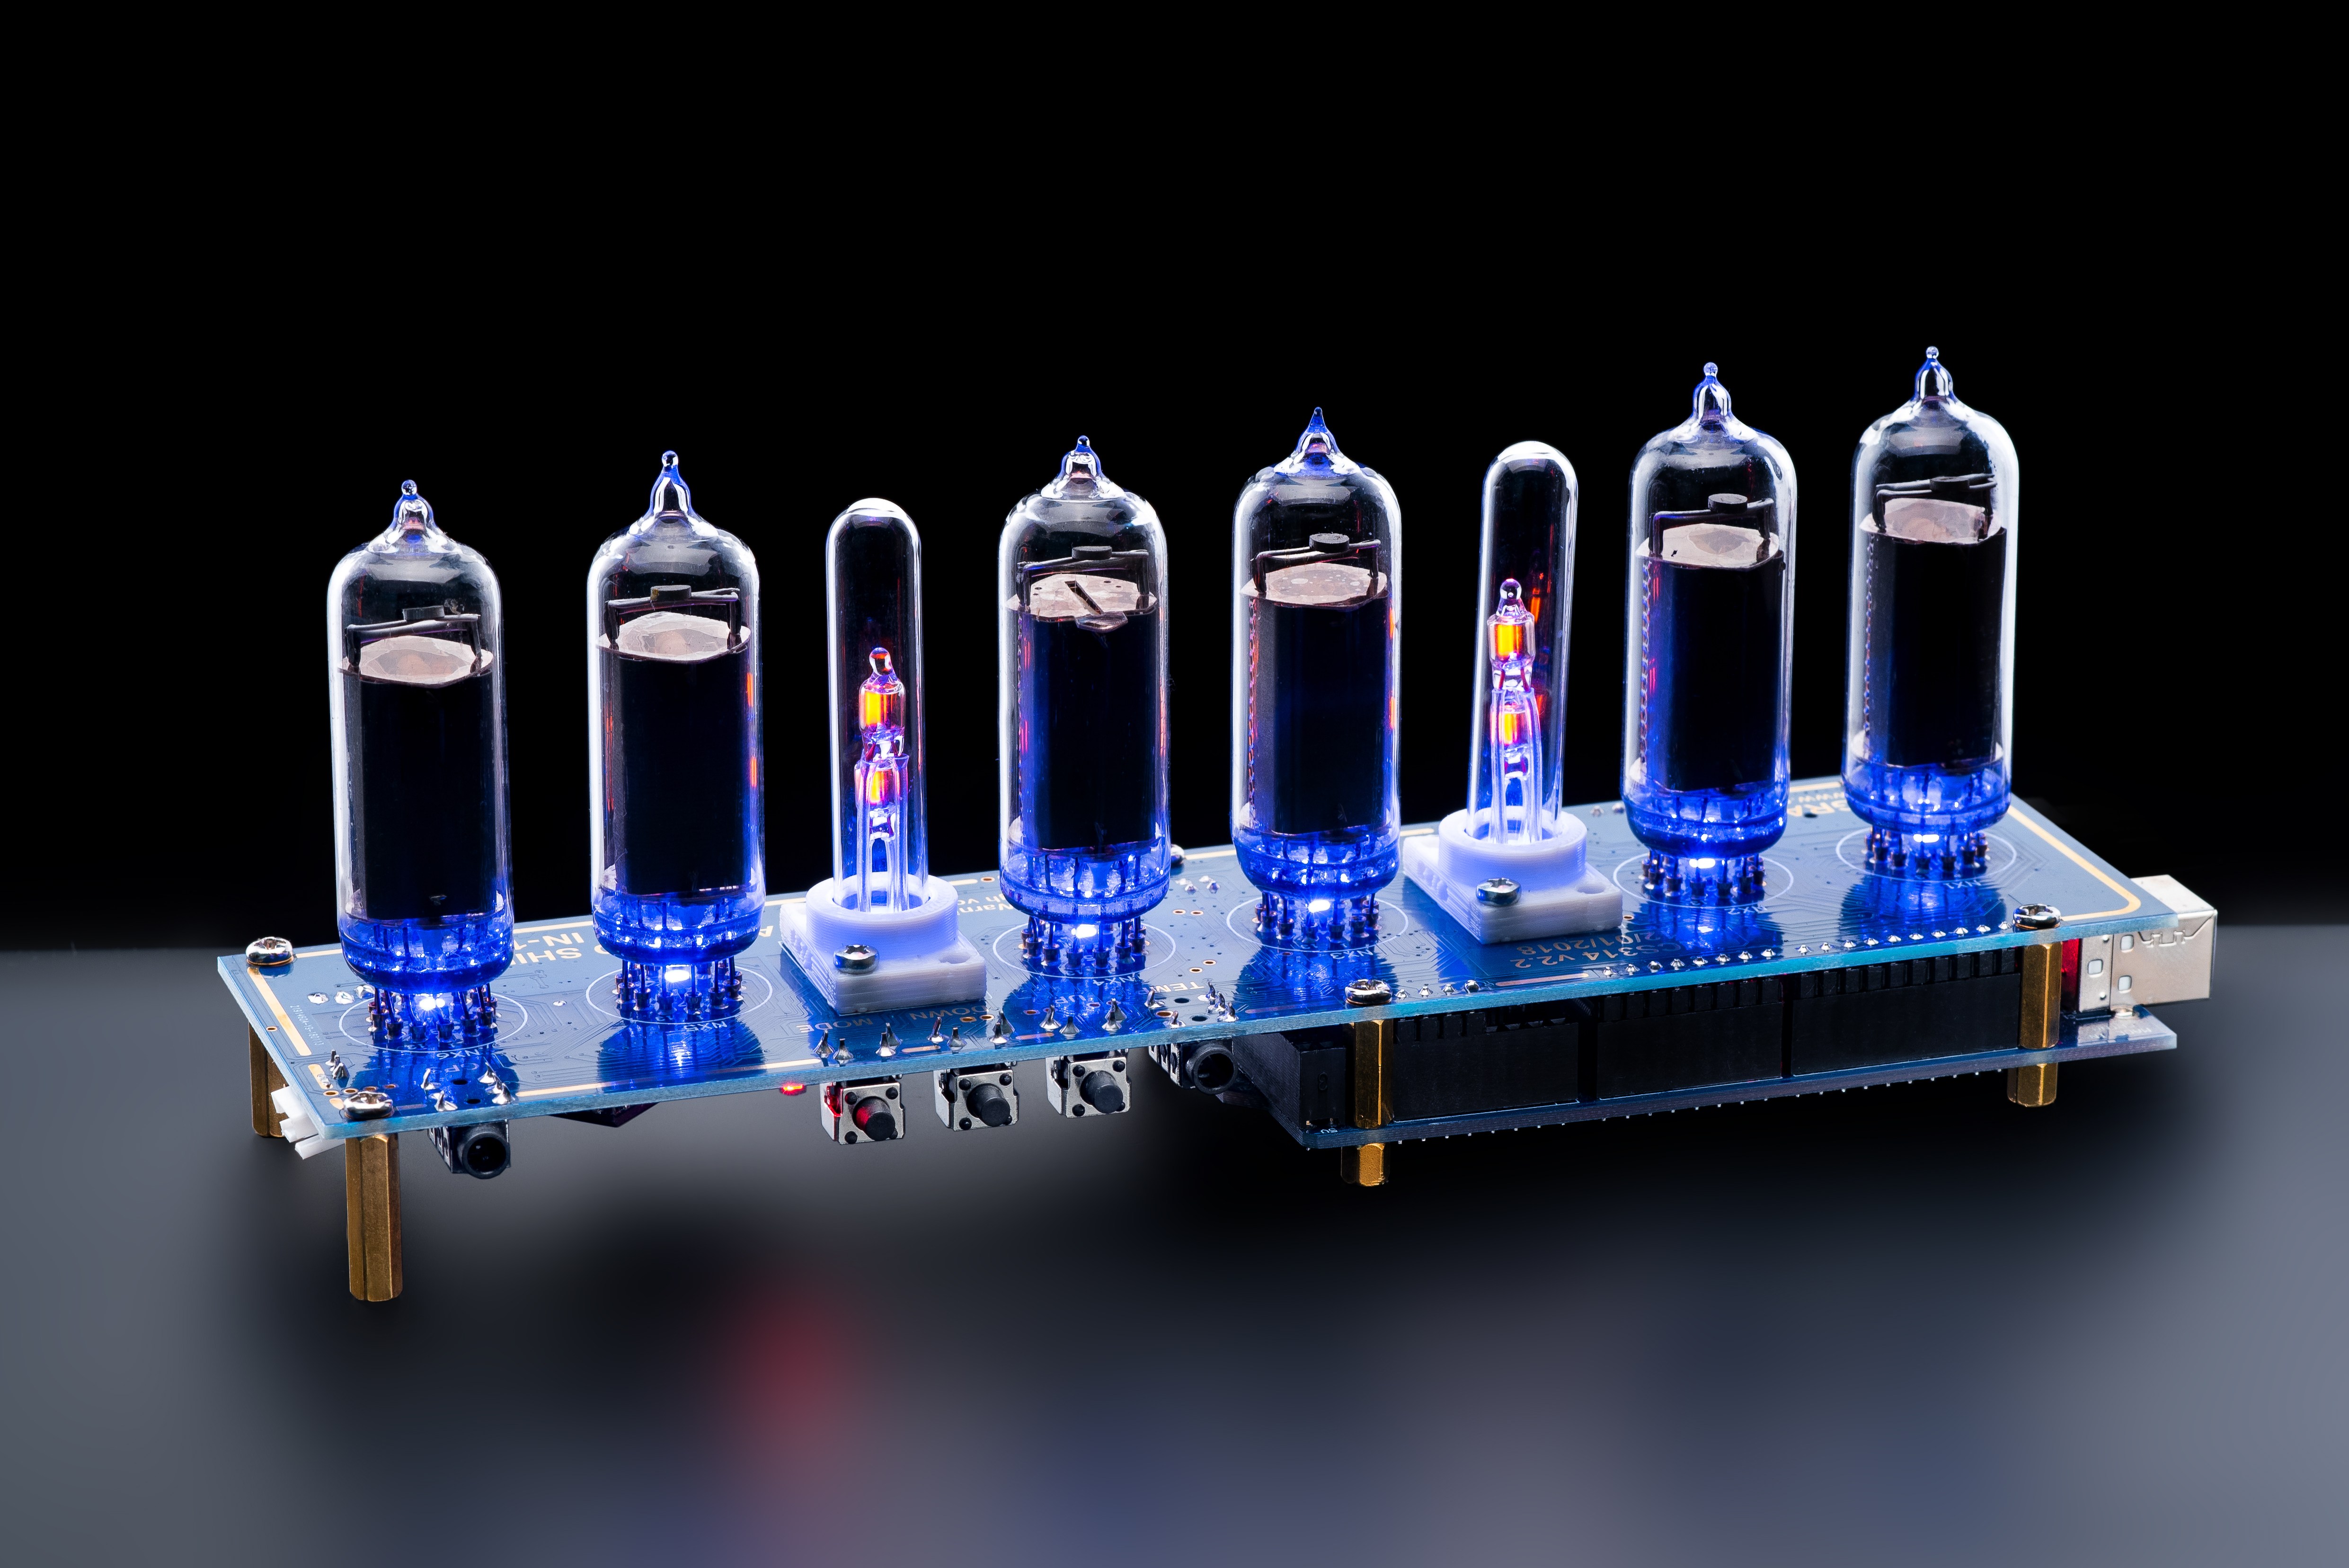 Details about   IN-14 Shield NCS314 Arduino Nixie Clock TUBES COLUMNS FAST DELIVERY 3-5 Days 